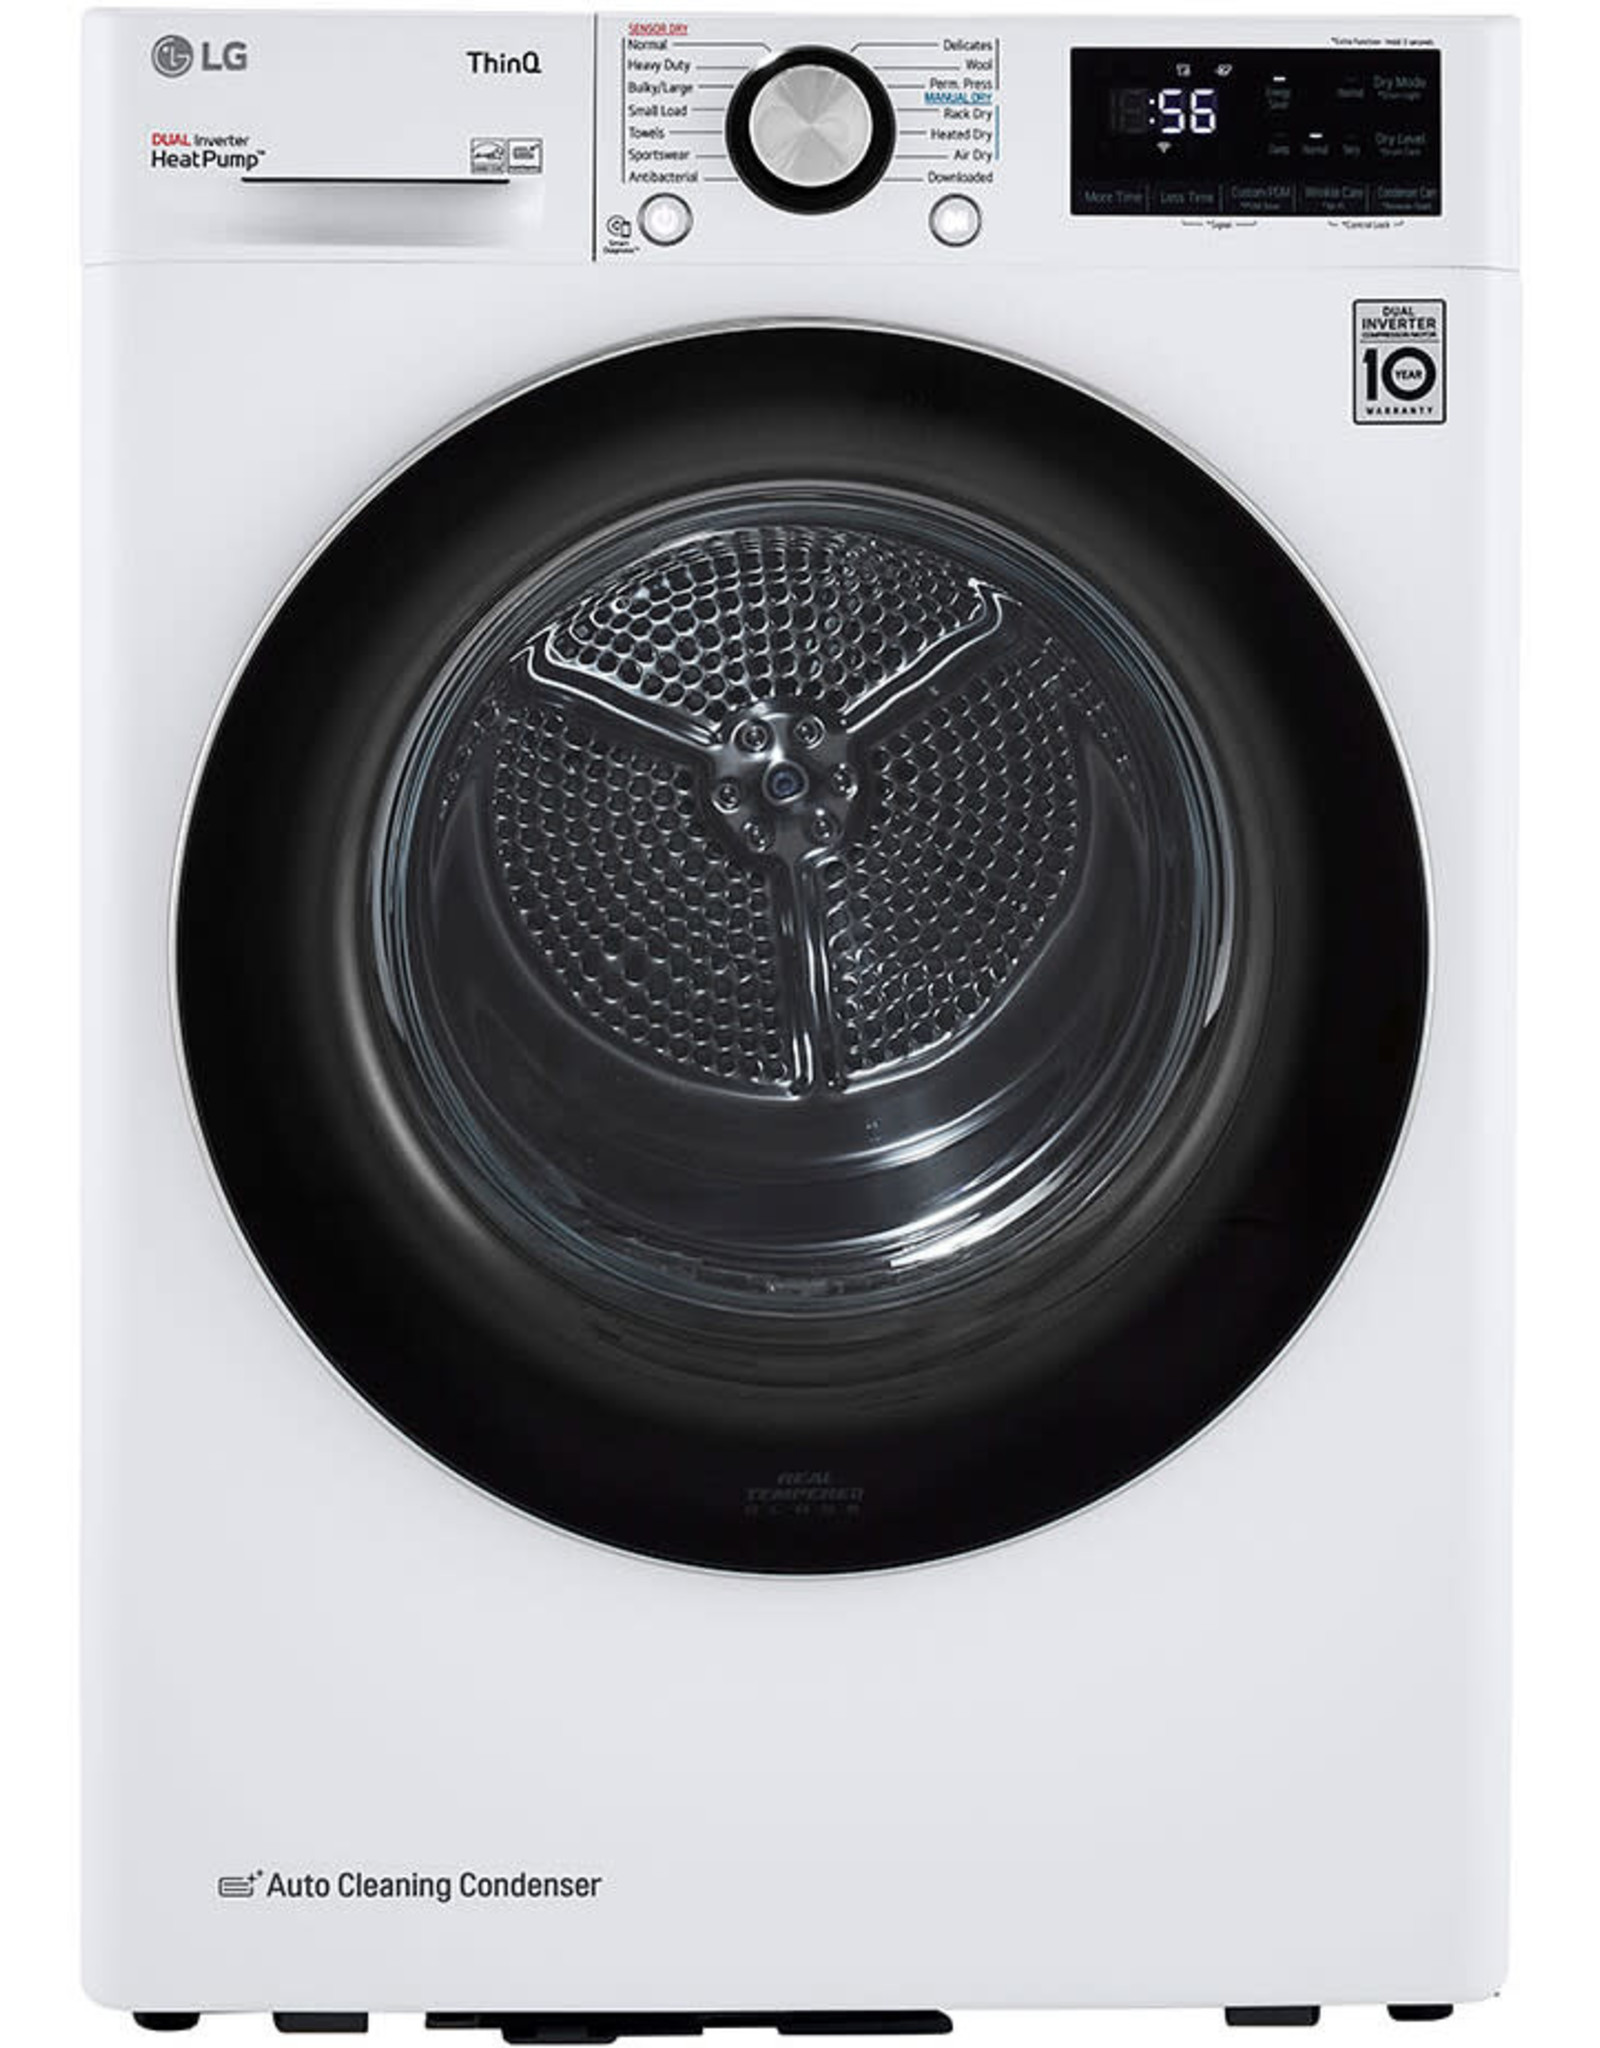 LG Electronics DLHC1455W 4.2 cu. ft. Compact White Electric Dryer with Dual Inverter HeatPump Technology